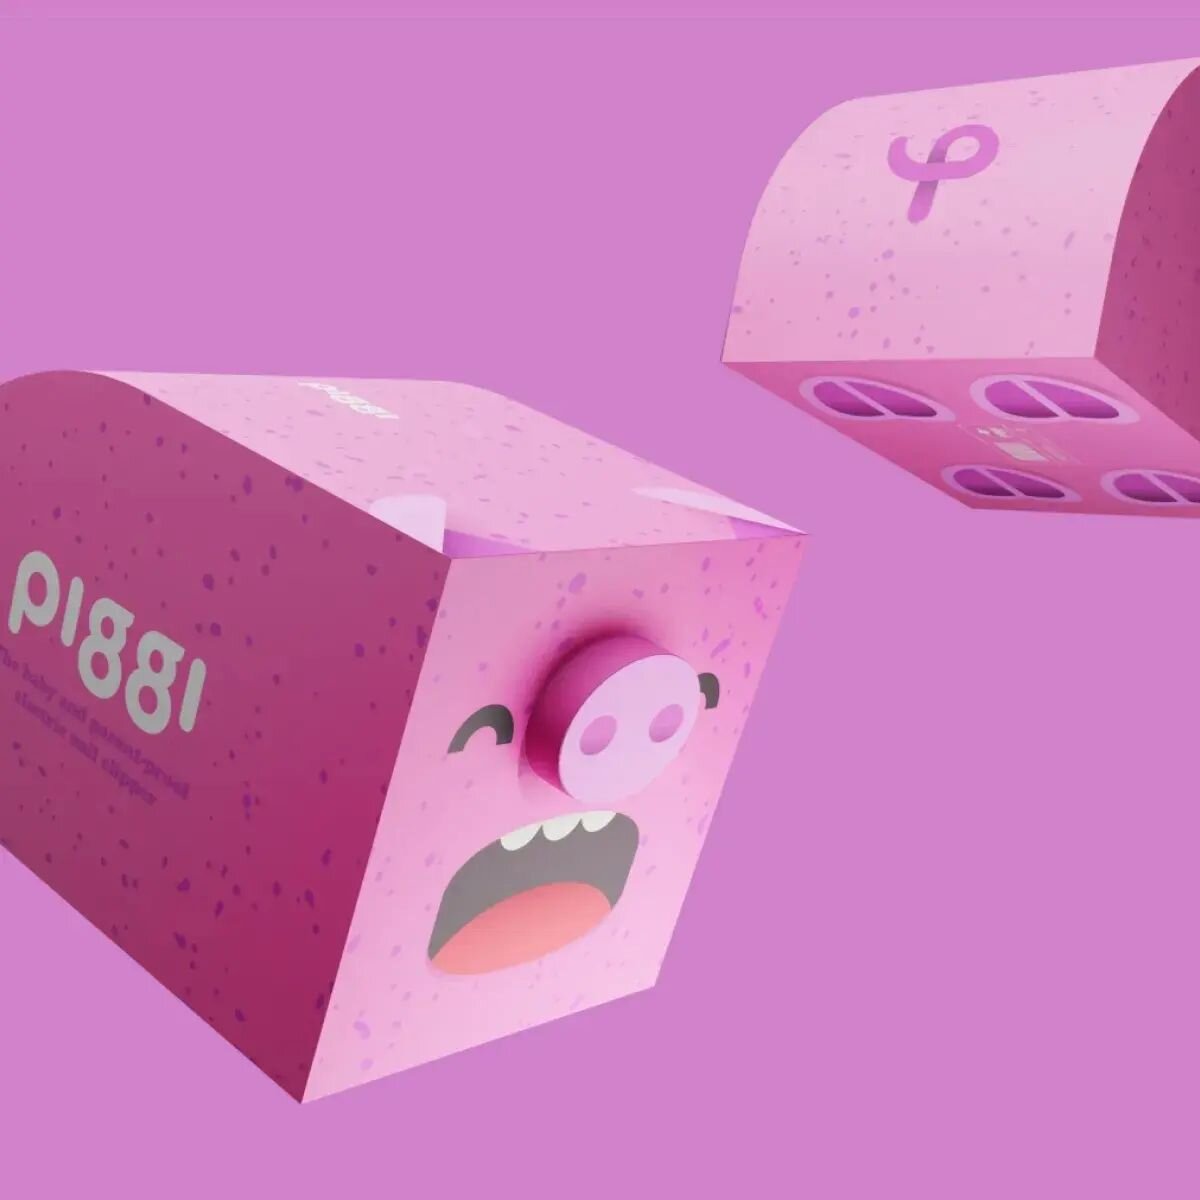 A family of bright, playful little Piggi&rsquo;s for your children&rsquo;s little piggies.

Introducing Pigi, the fourth in a series of concepts that reimagine infant nail care. Pigi is part of 4 different brand directions that explore everything fro